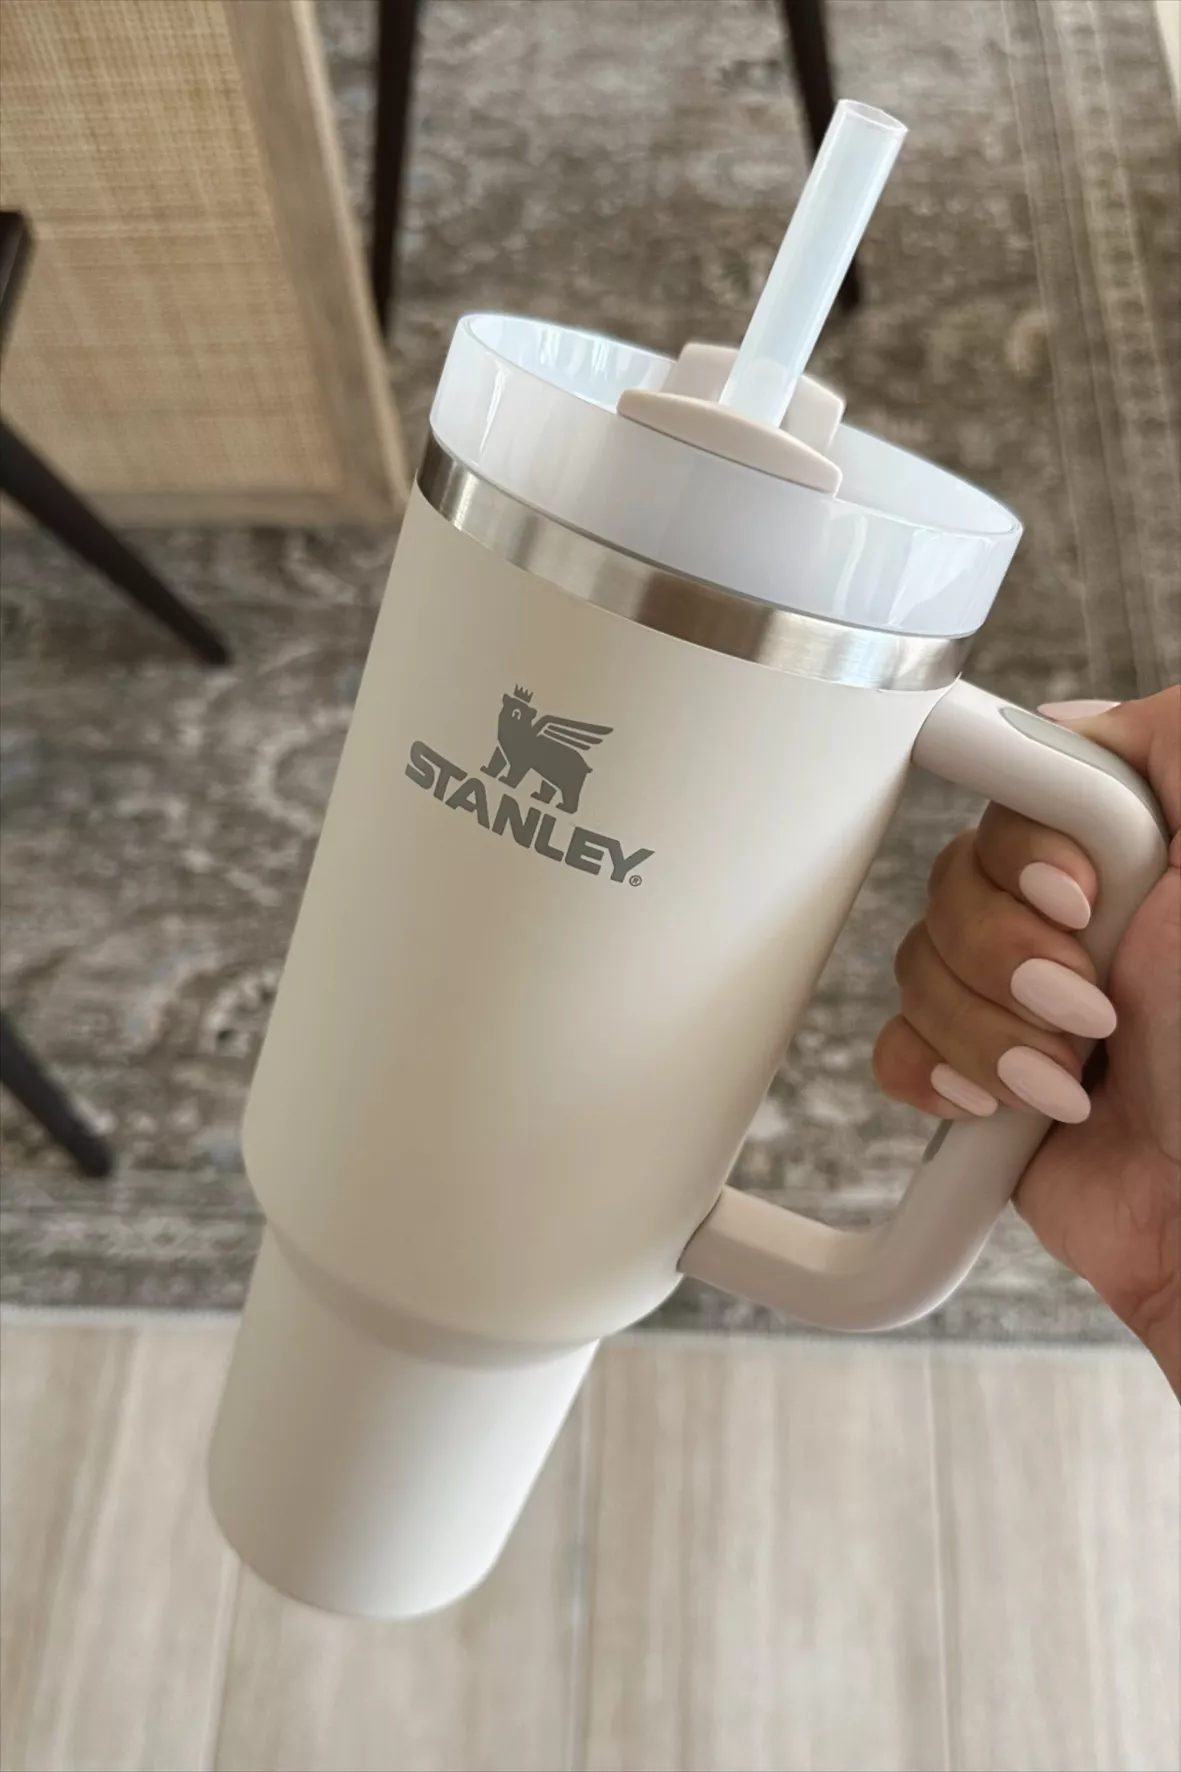 stanleybrand soft matte poor quality….🙁 #stanley #stanleycup #stable